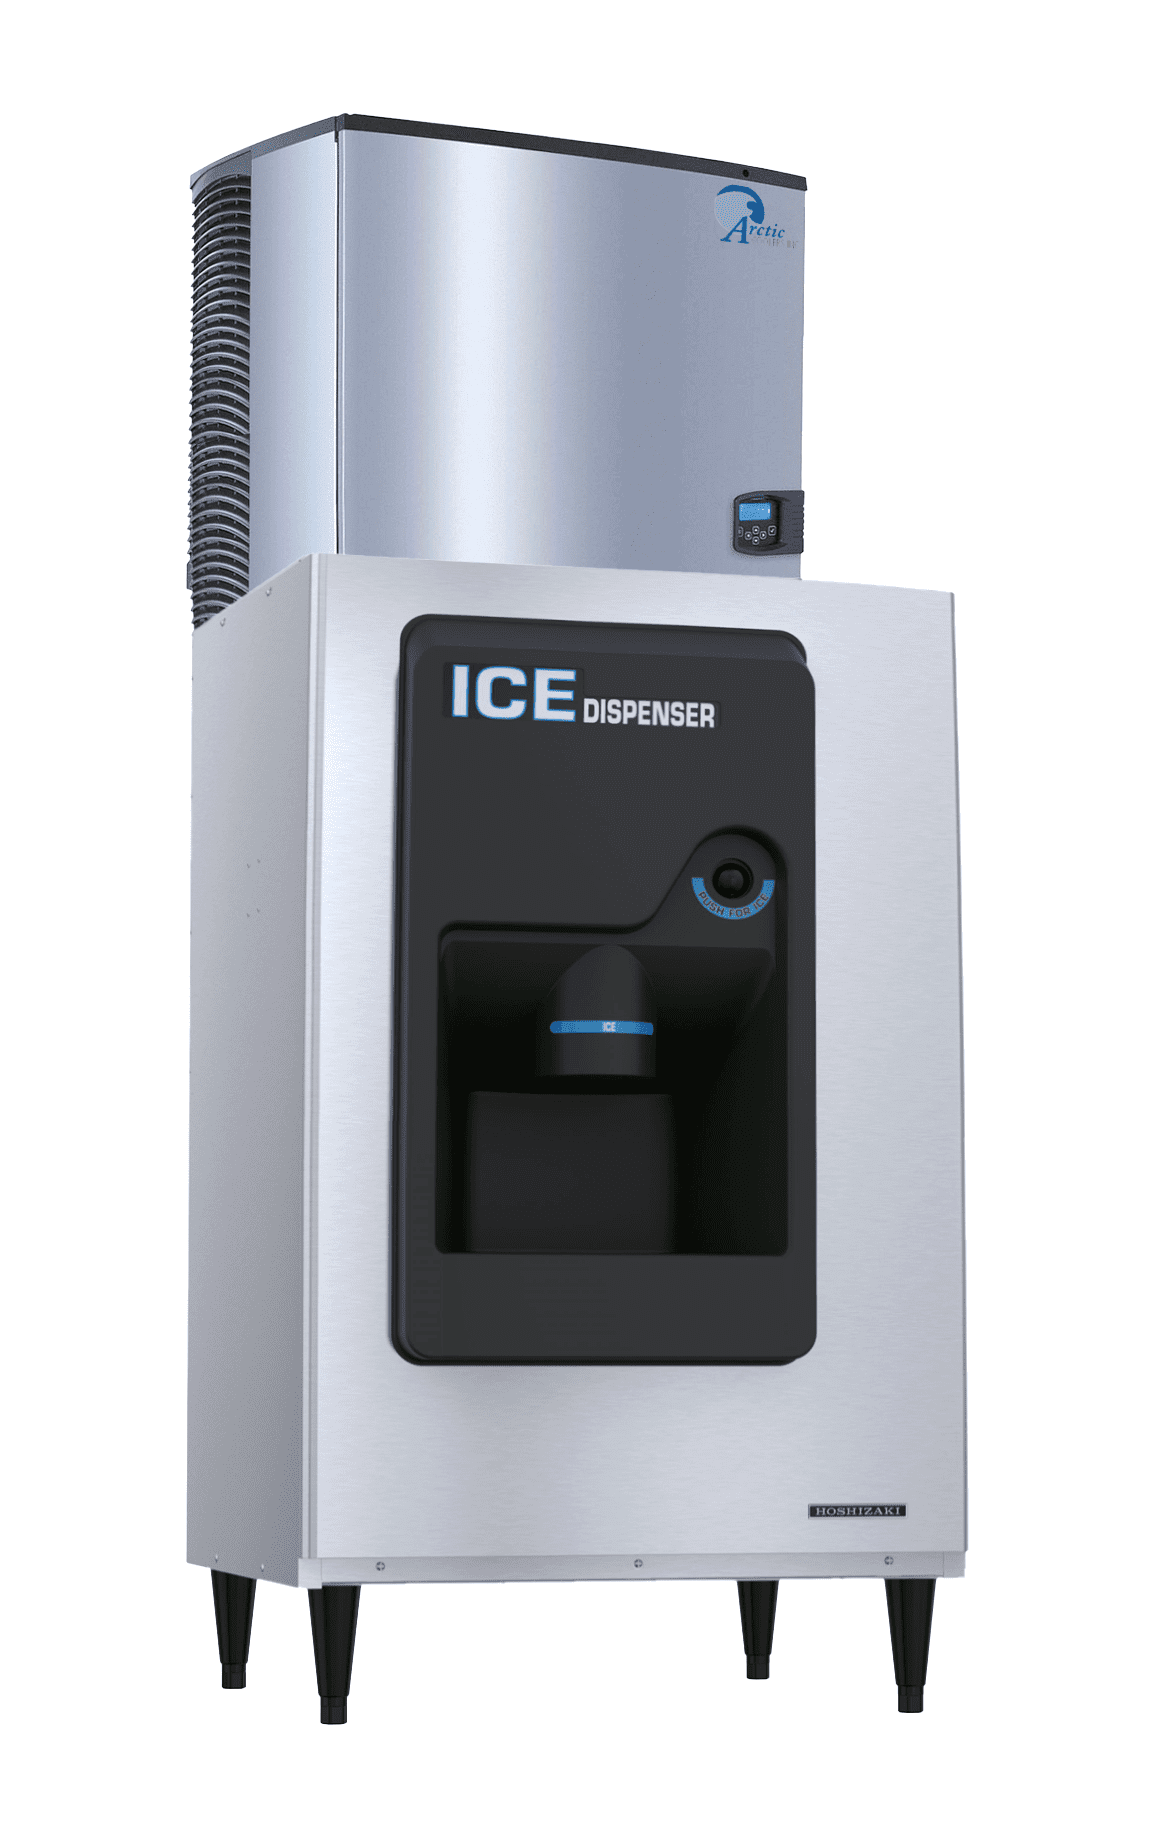 The Hoshizaki IYF-900A Air Cooled Half Dice Ice Machine from Arctic Coolers